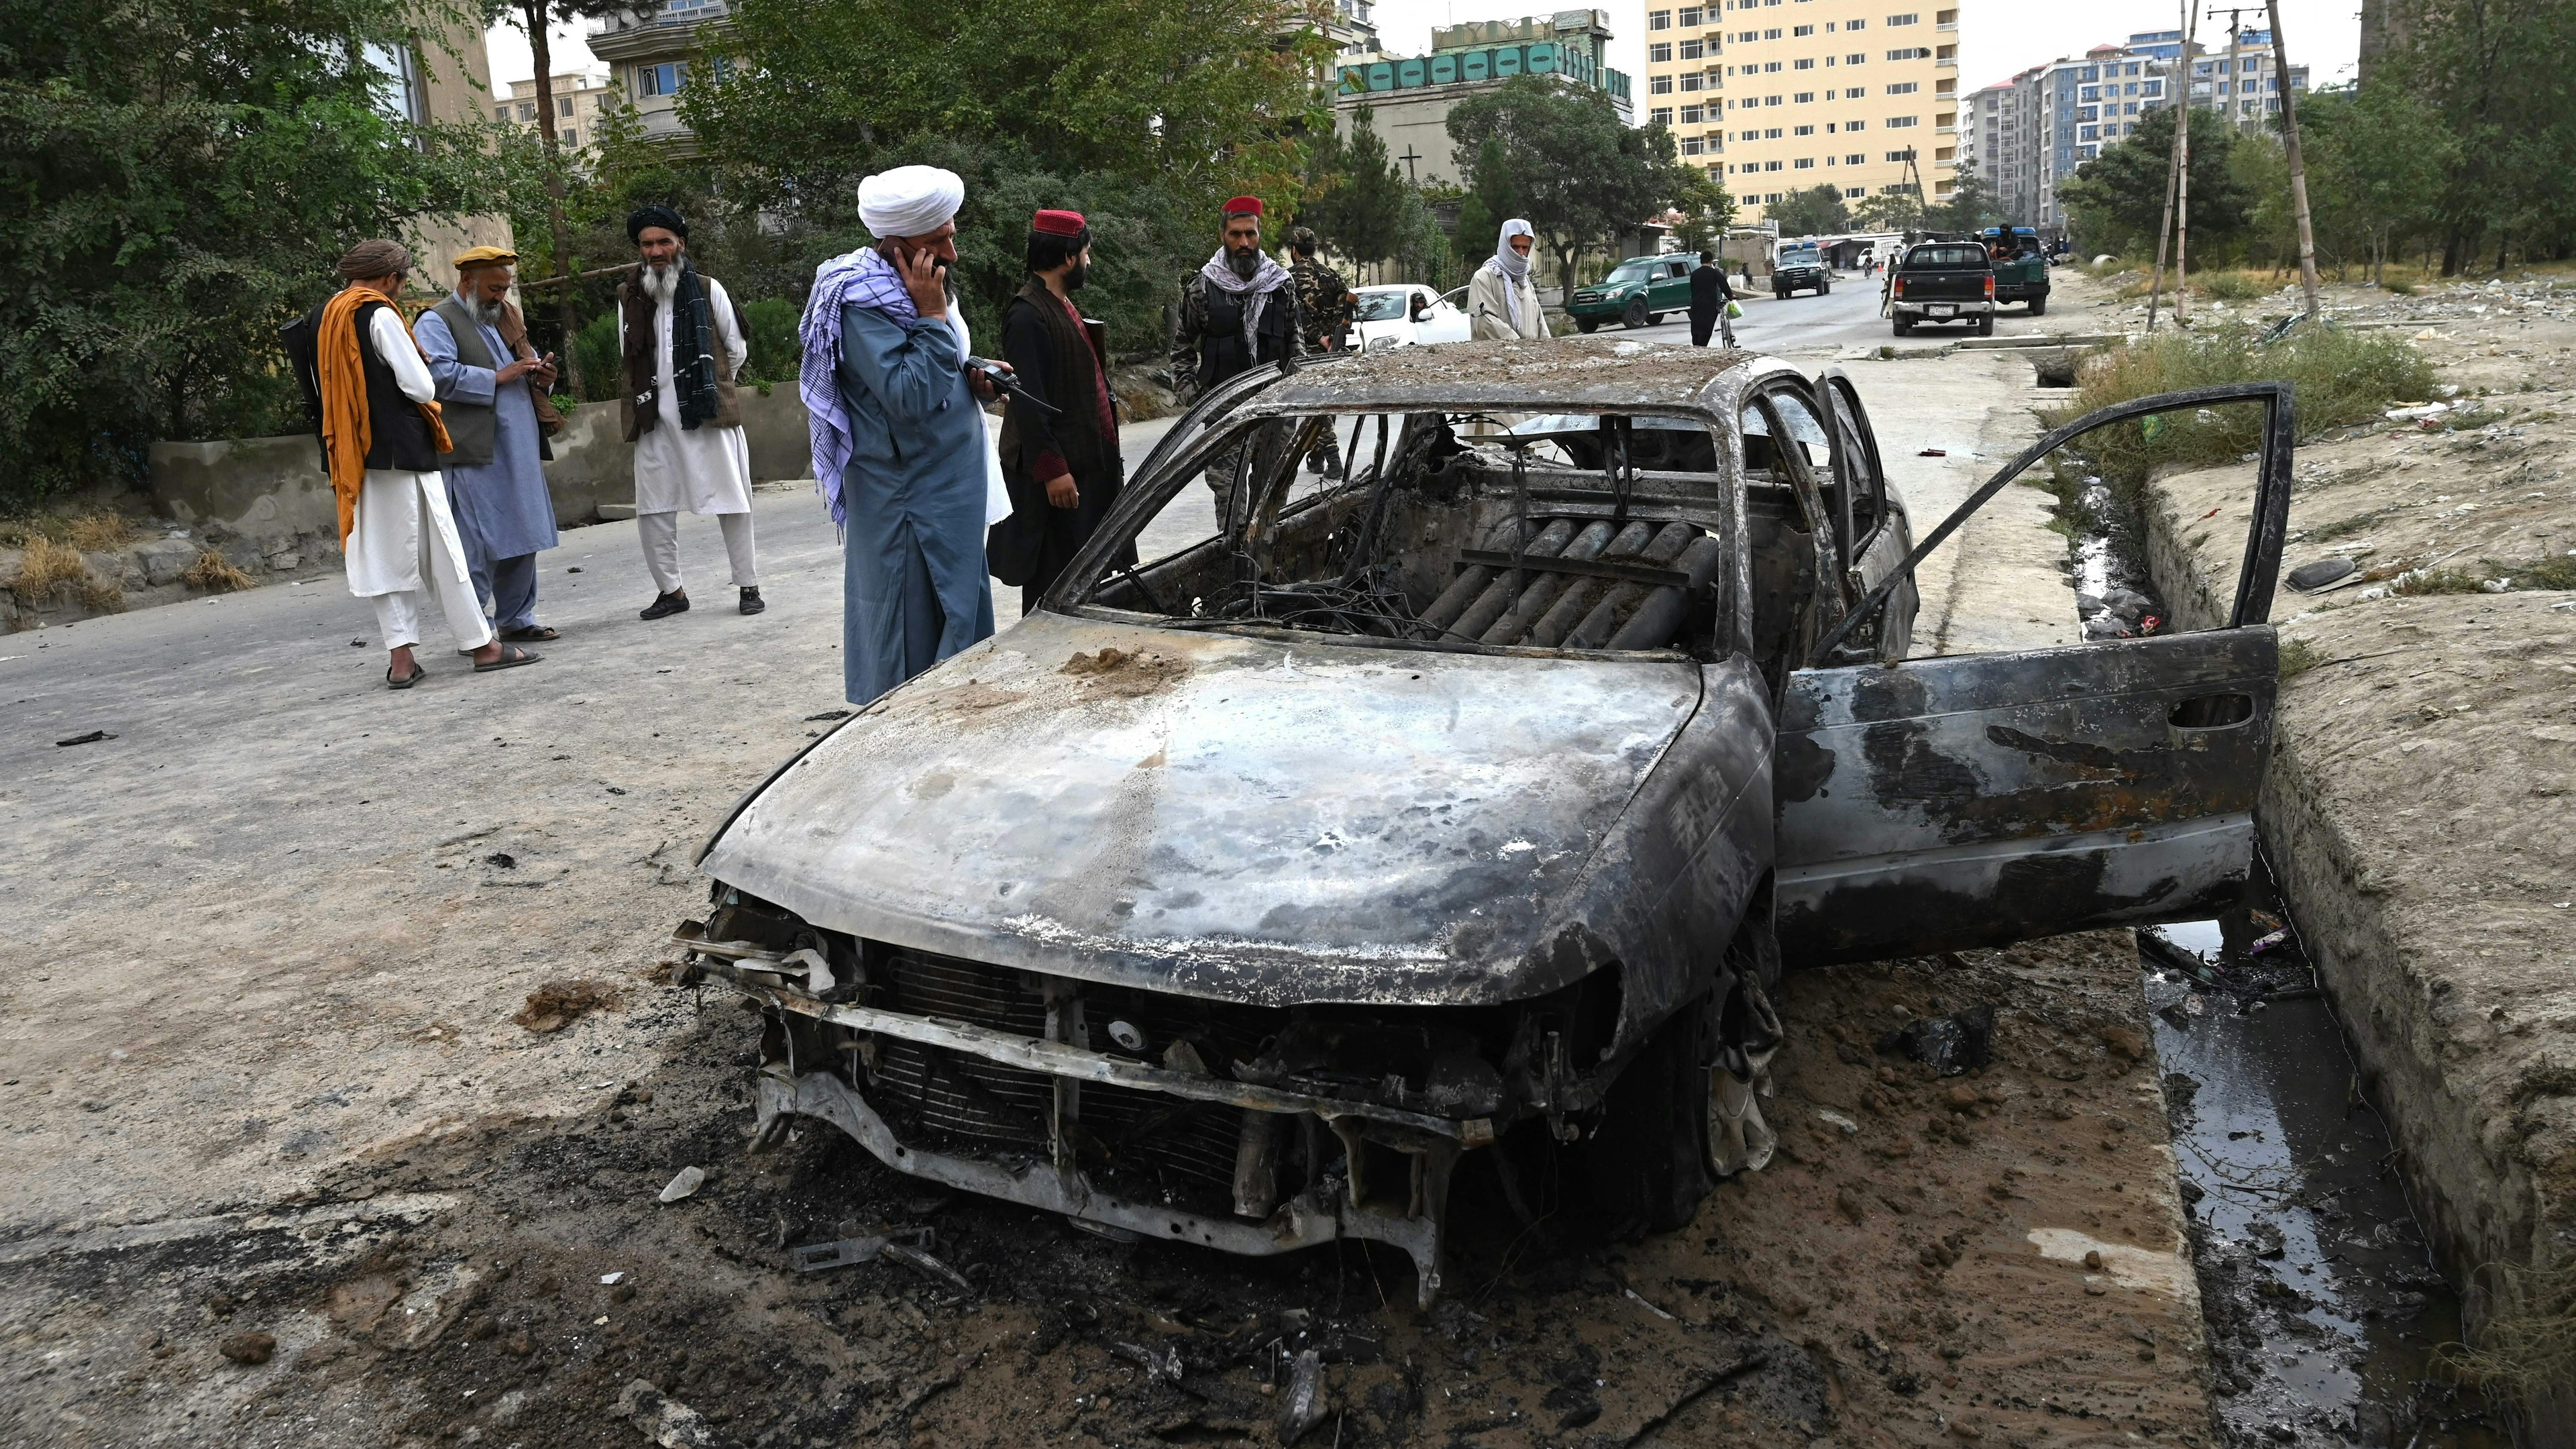 Taliban fighters investigate a damaged car after multiple rockets were fired in Kabul